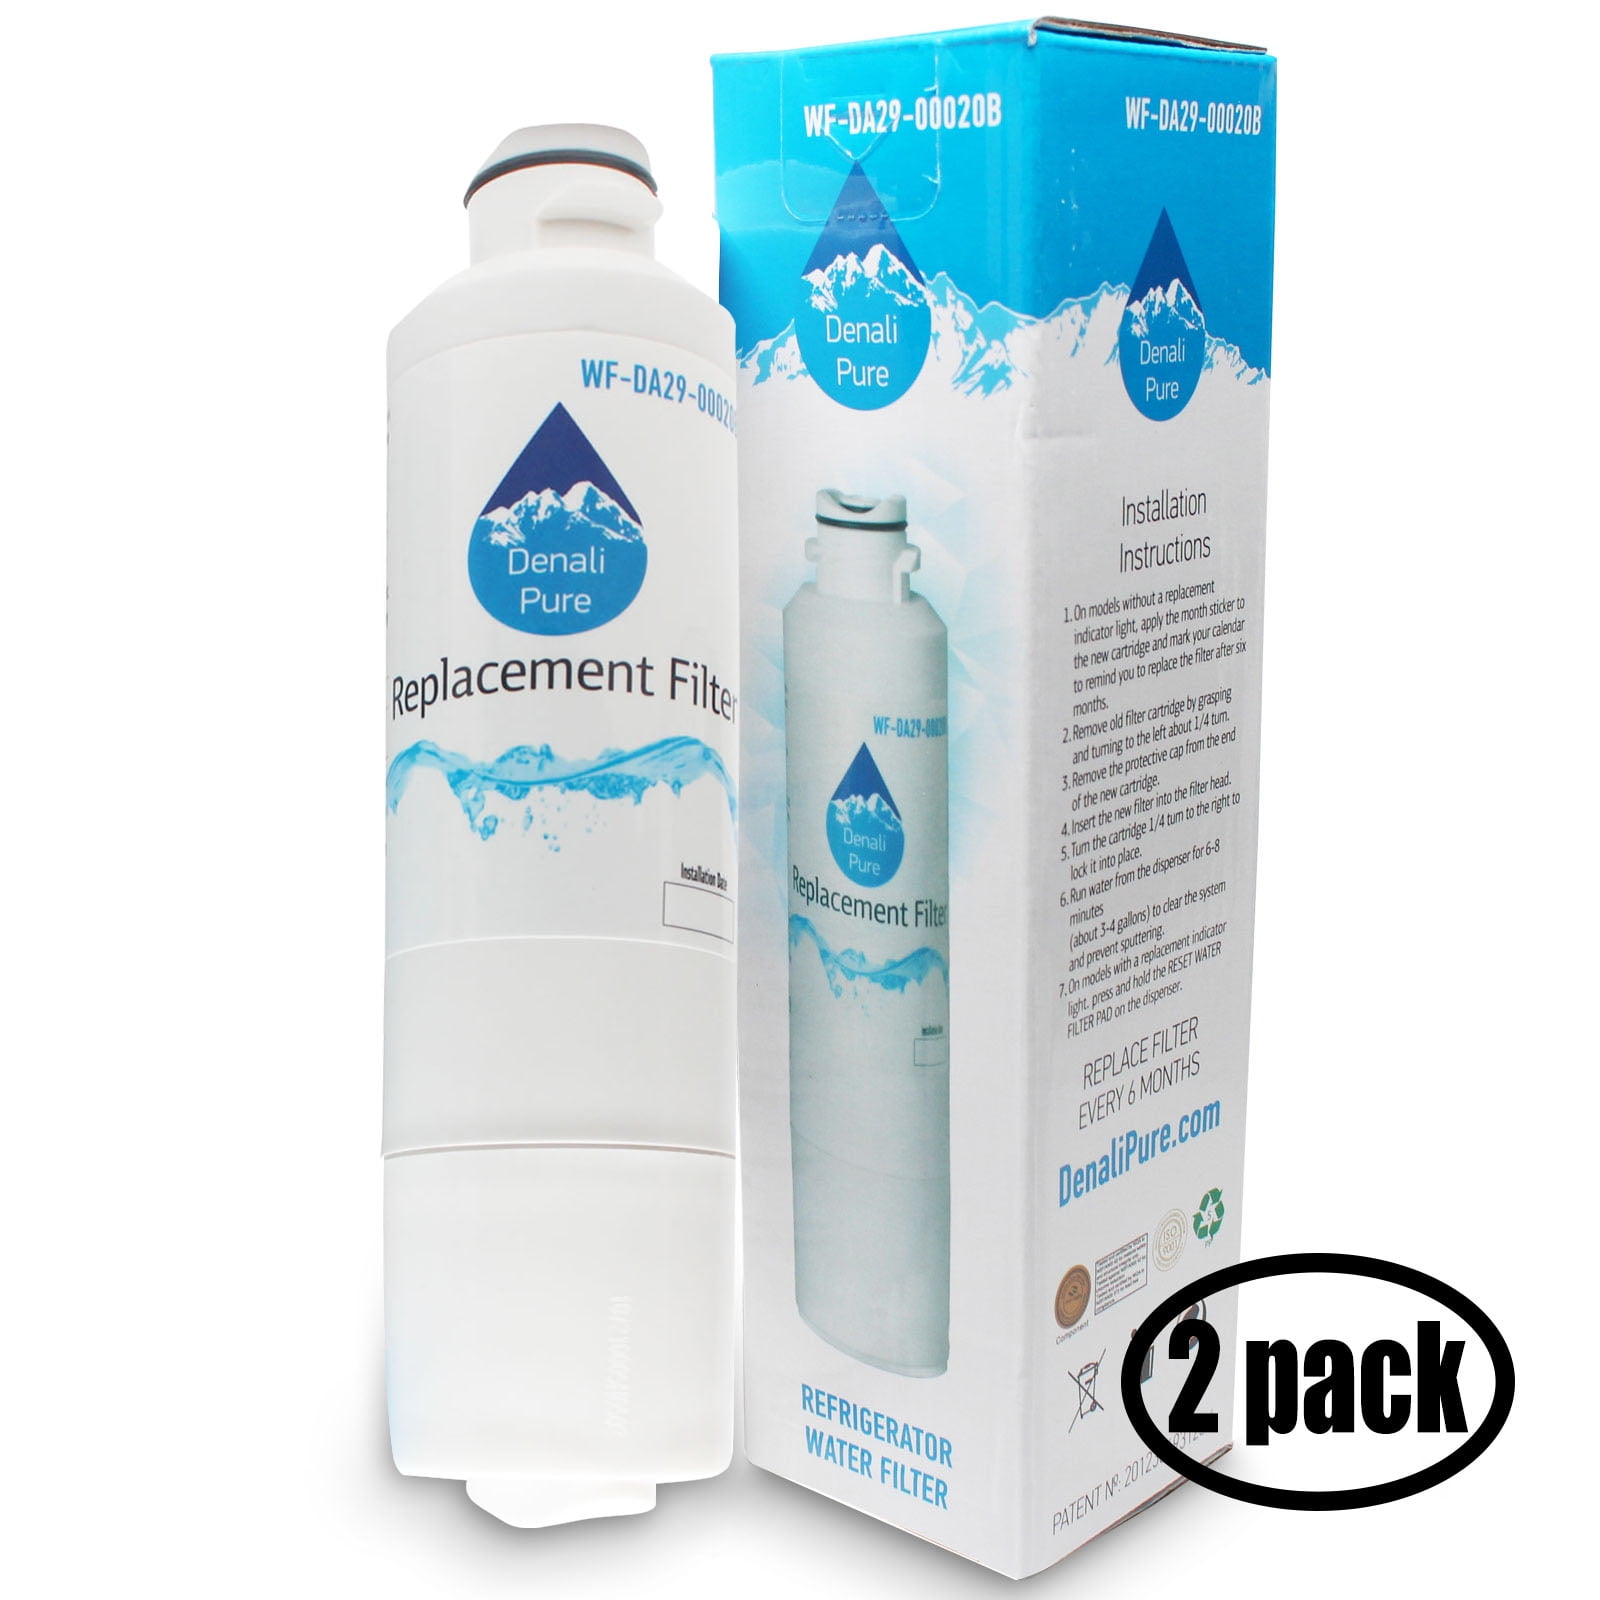 RFG298HDPN Compatible Refrigerator Water and Ice Filter 2 Pack 